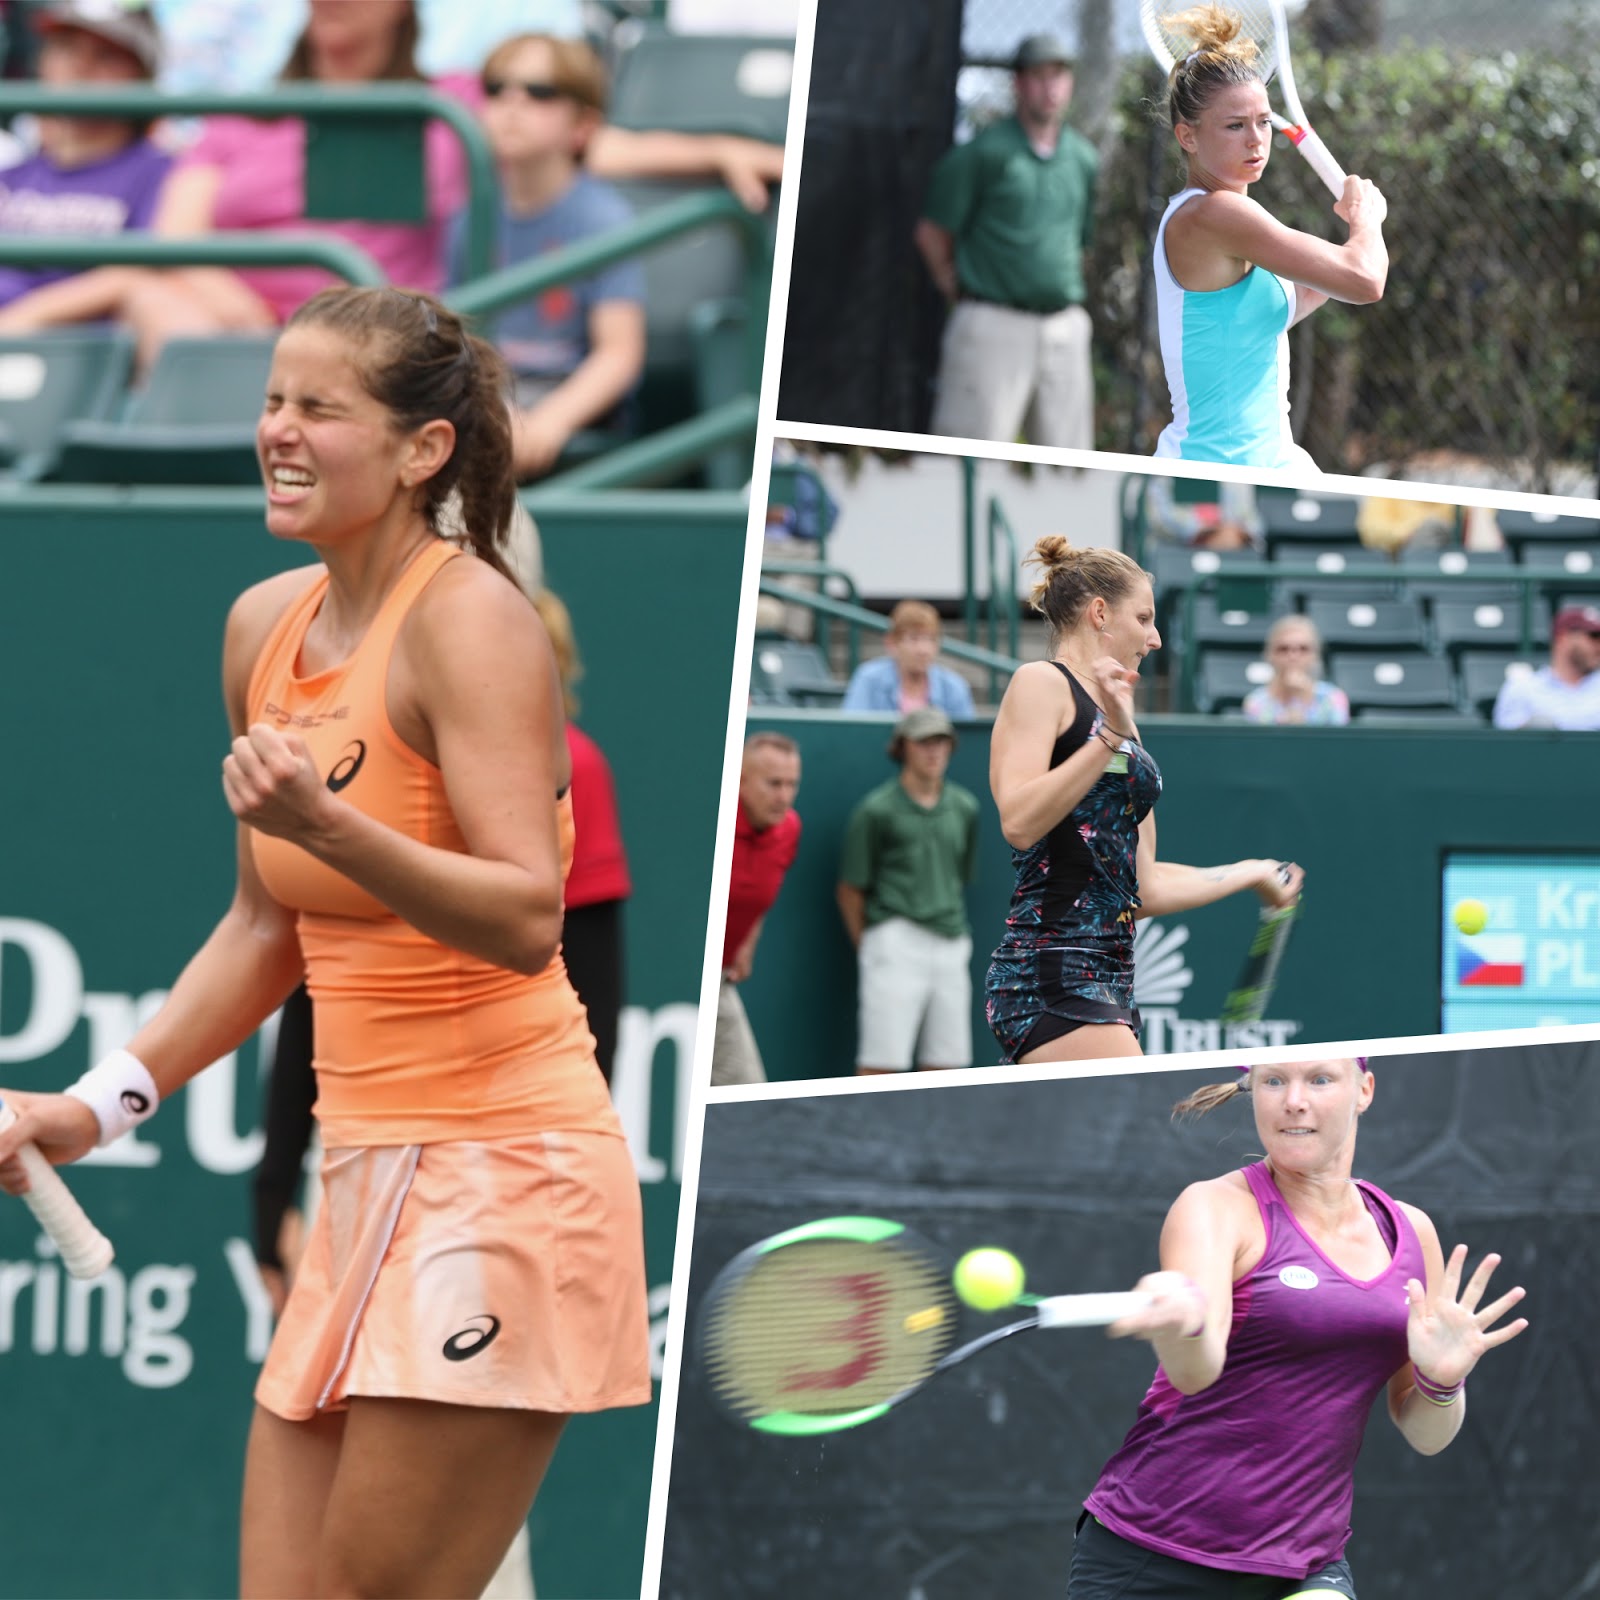 Julia Goerges and Andrea Petkovic riding German tennis wave at